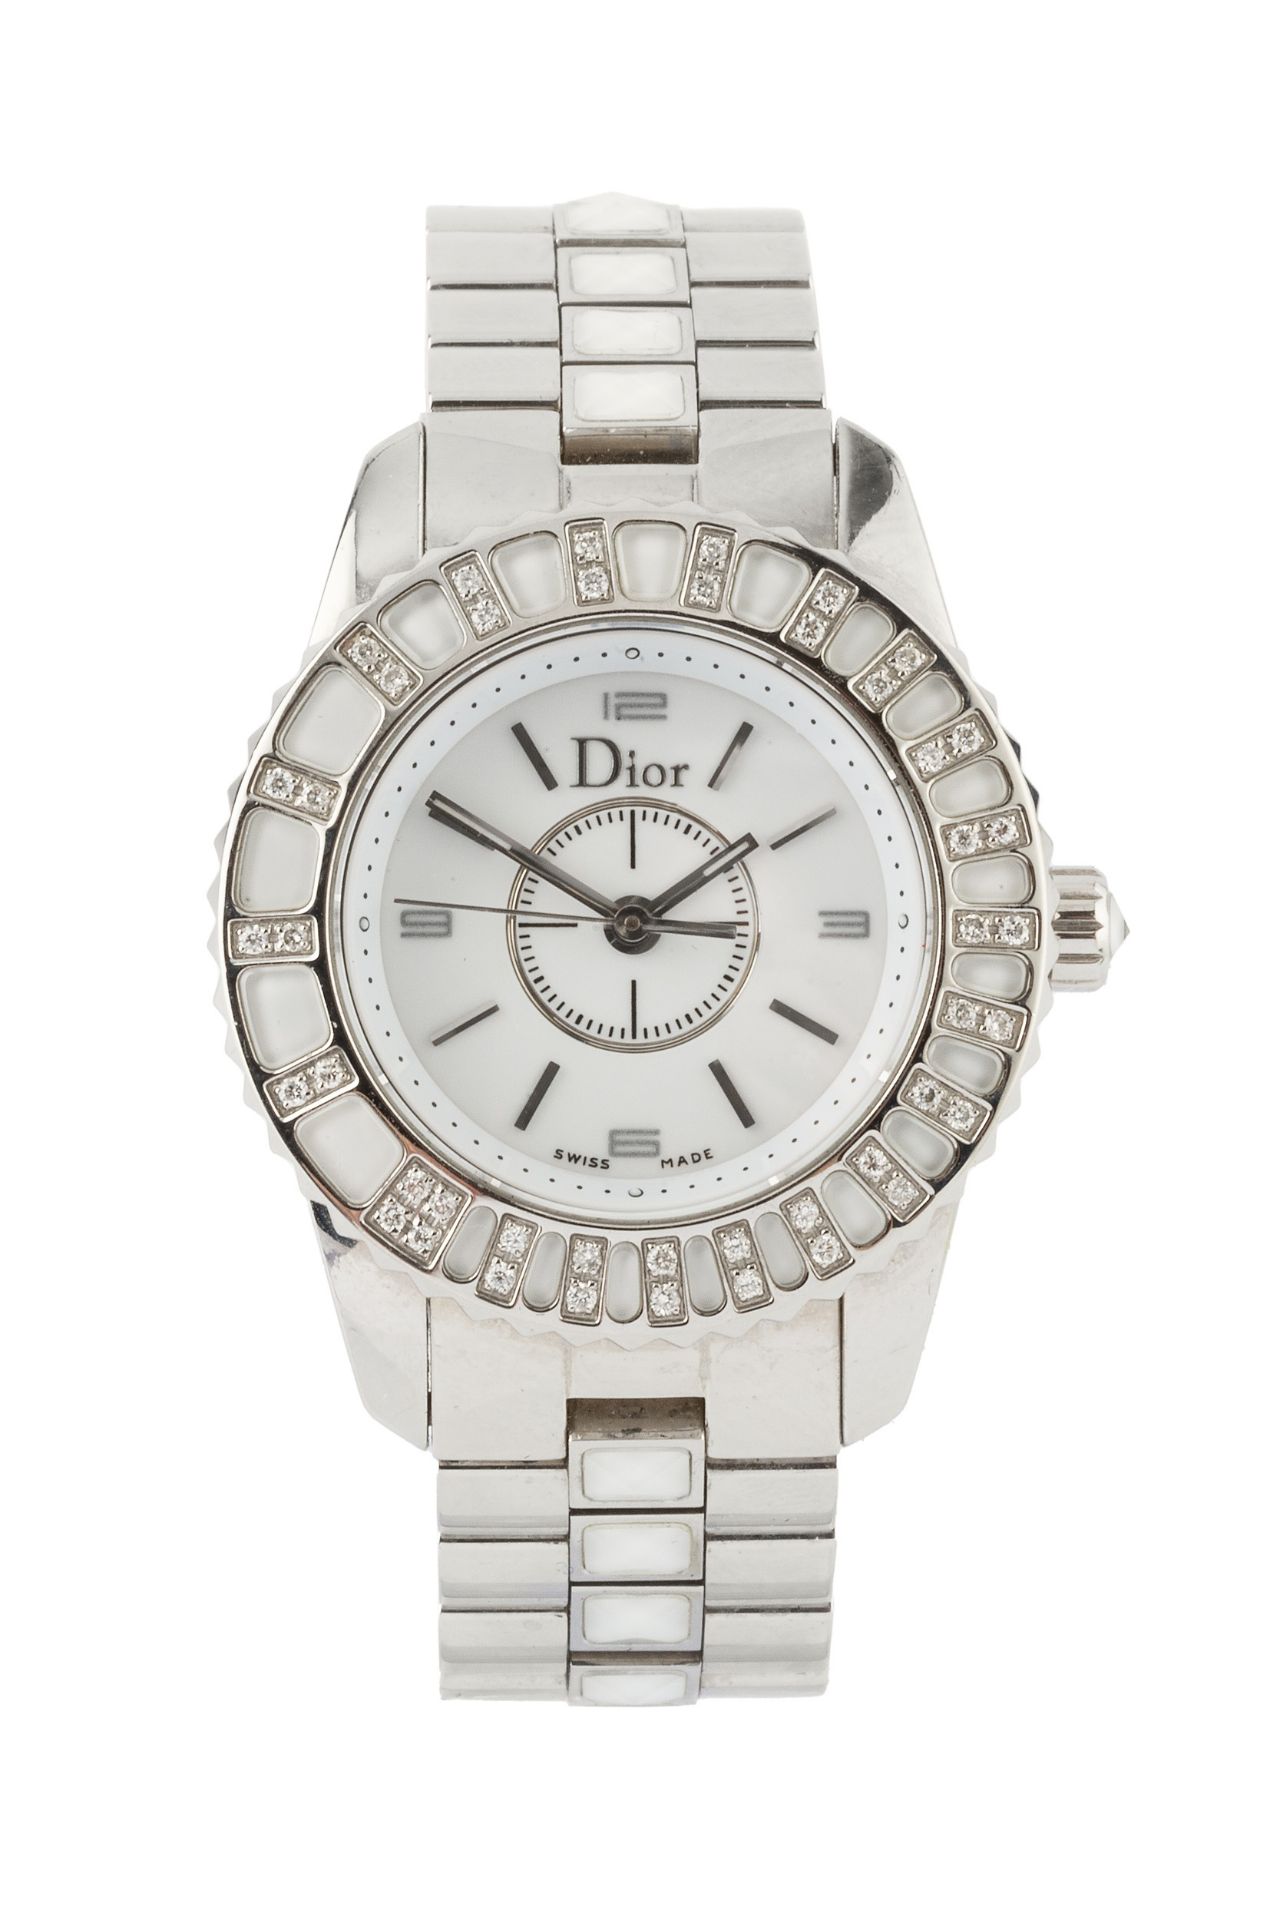 A lady's steel and diamond 'Christal' wristwatch by Christian Dior, with white circular dial, the